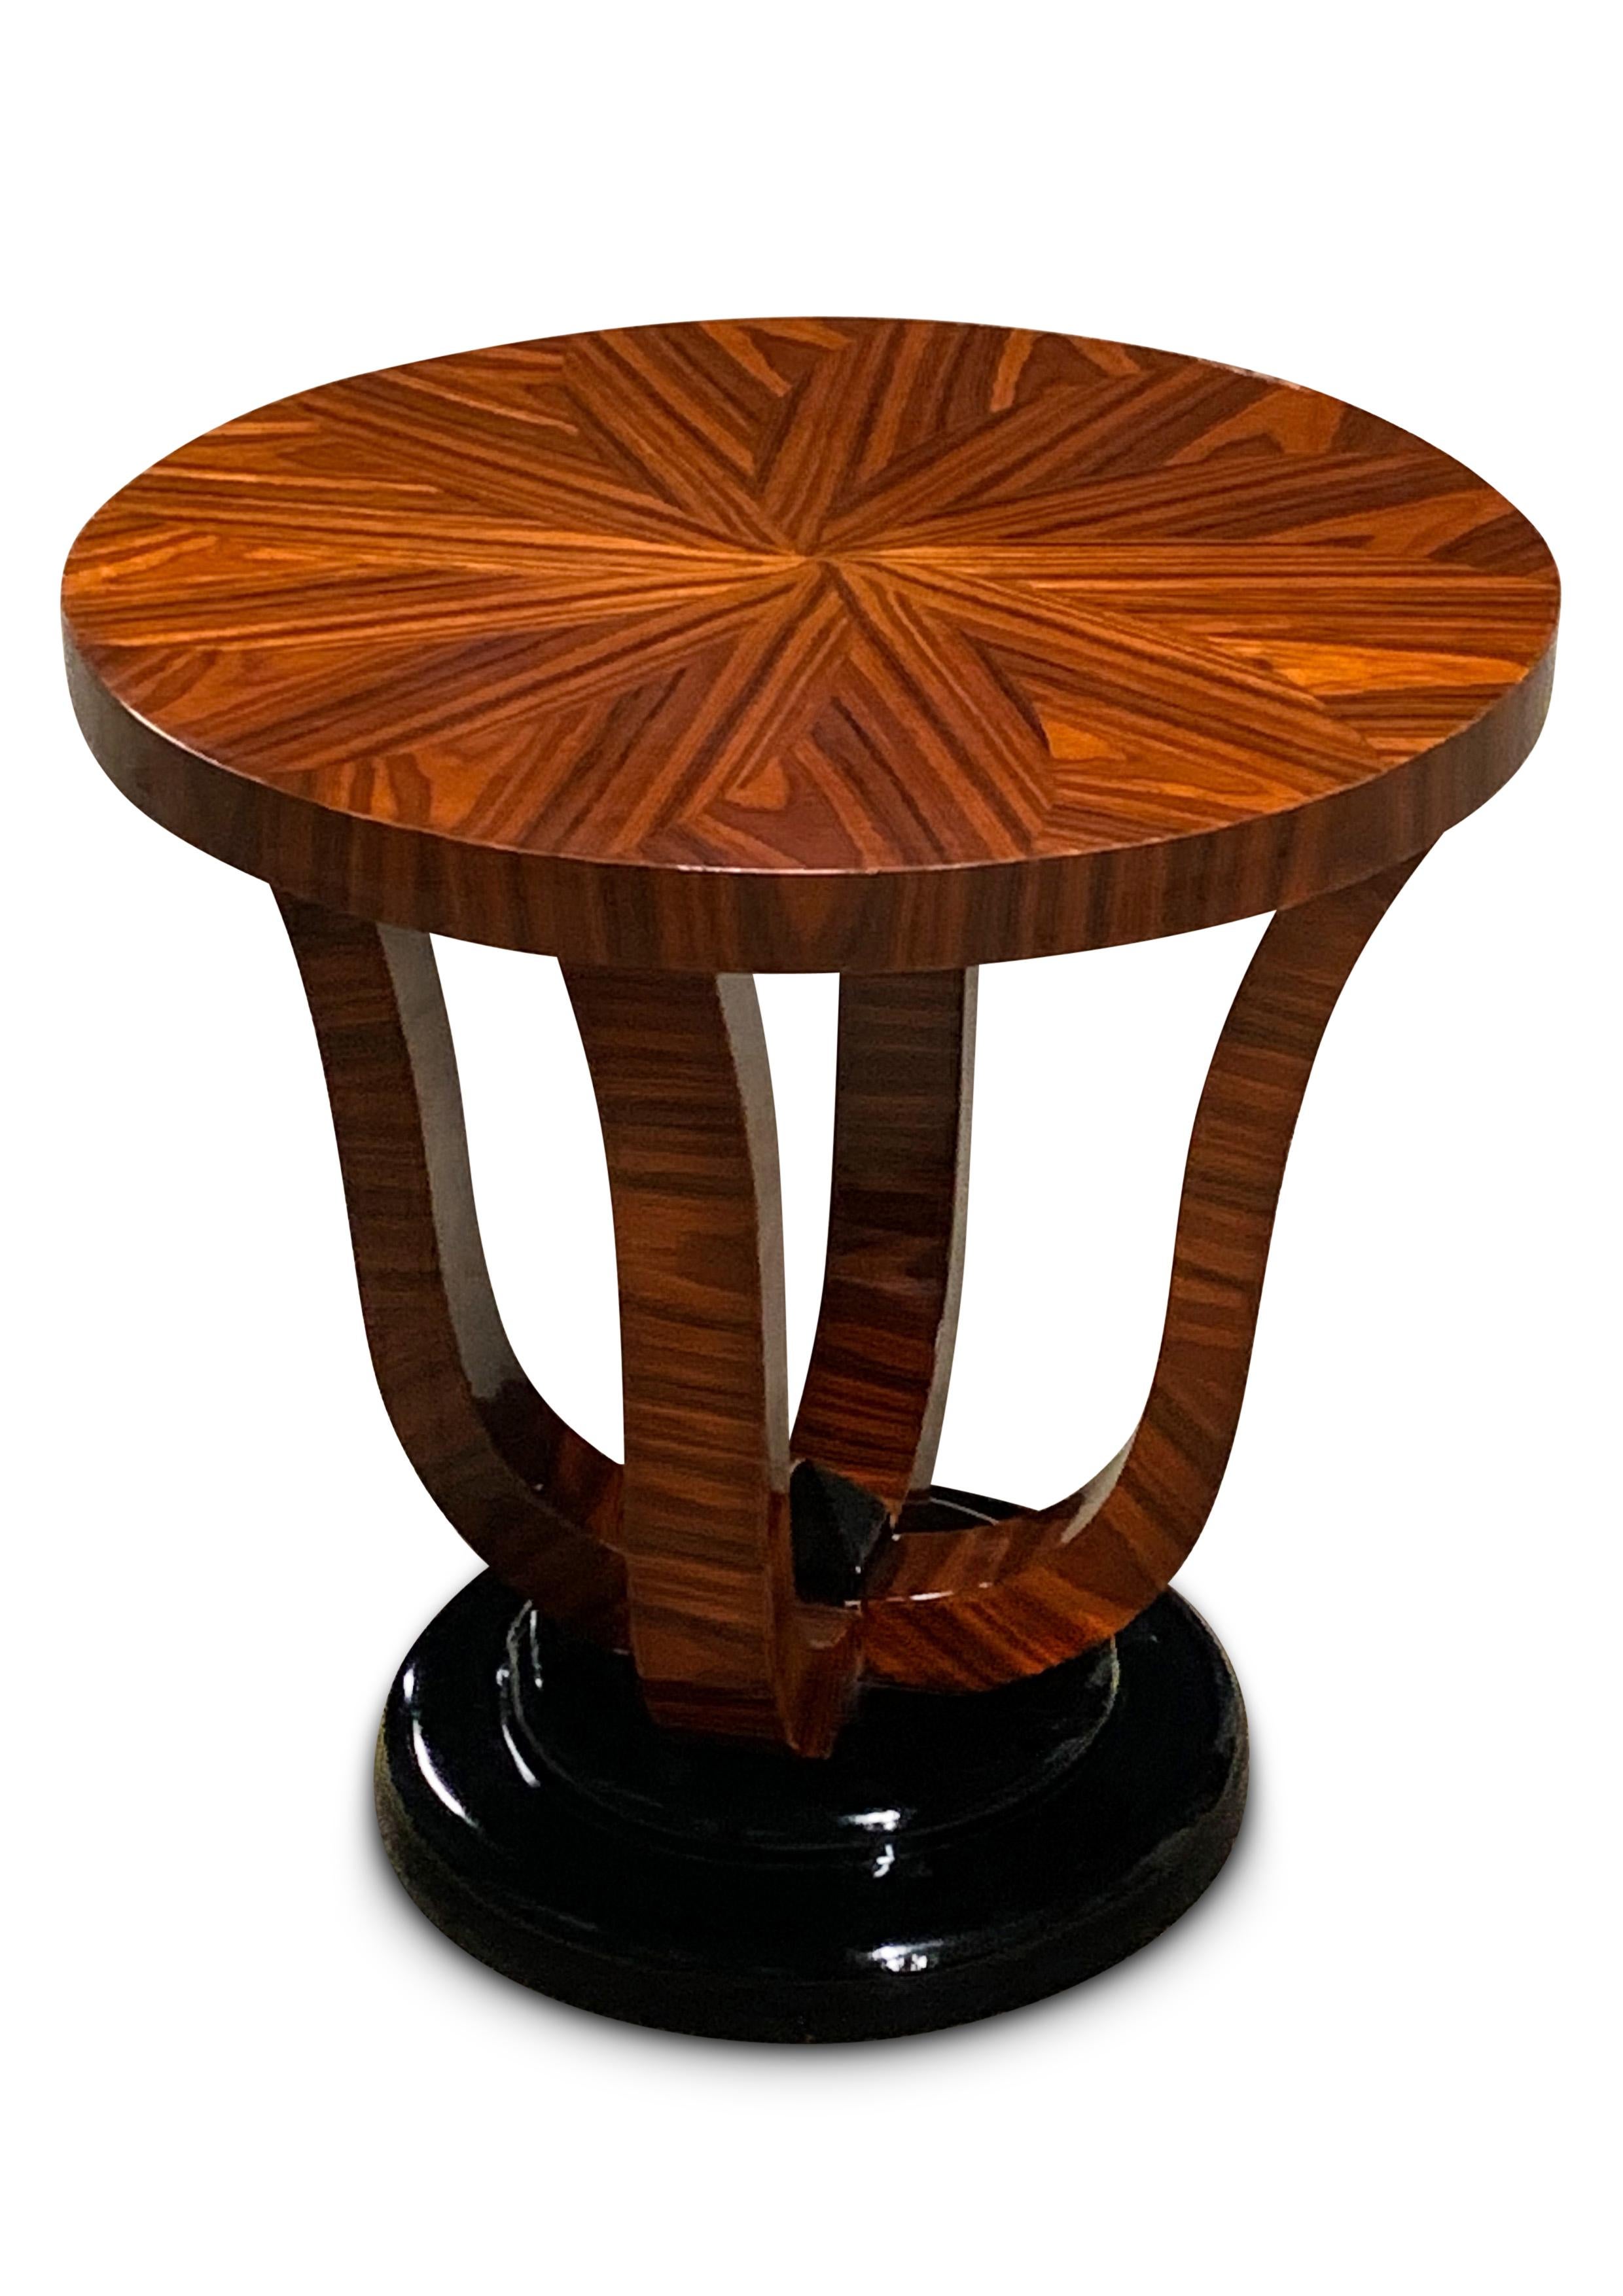 Jules Leleu Style Art Deco Gueridon Table With A Beautiful Rosewood Sunburst Top On An Open Frame Ebonised Base 

Item is highly polished and extremely well executed with a beautiful wood grain. 

1920's 

